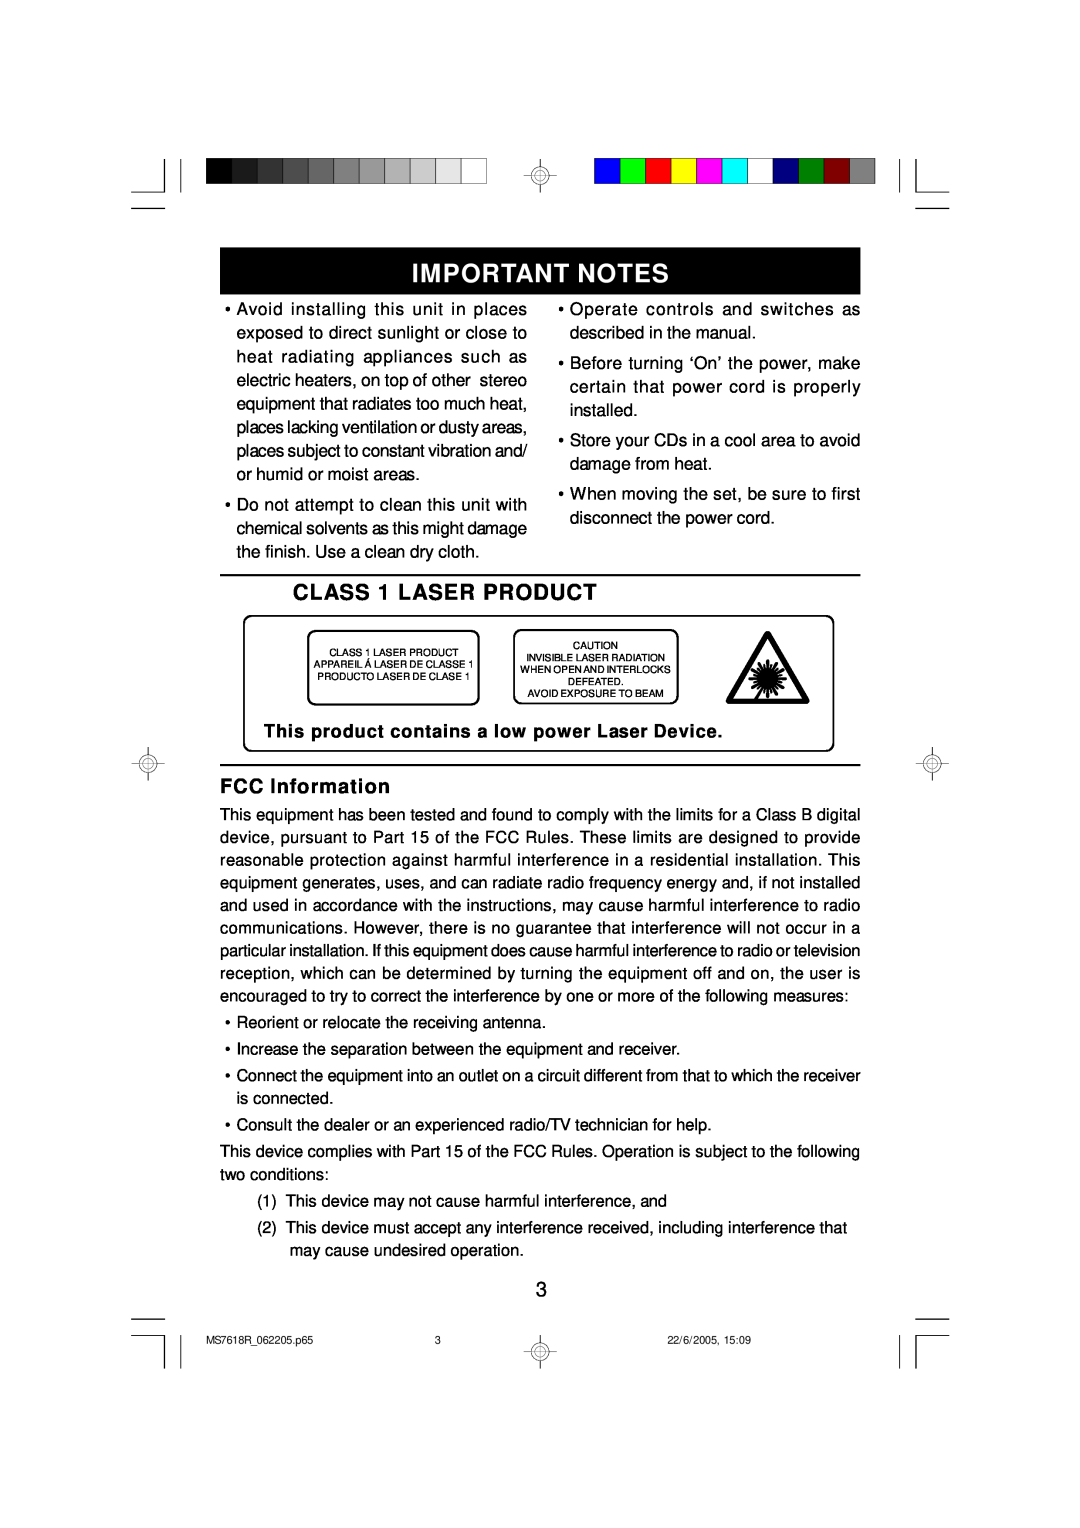 Emerson MS7618R owner manual Important Notes, CLASS 1 LASER PRODUCT, FCC Information 